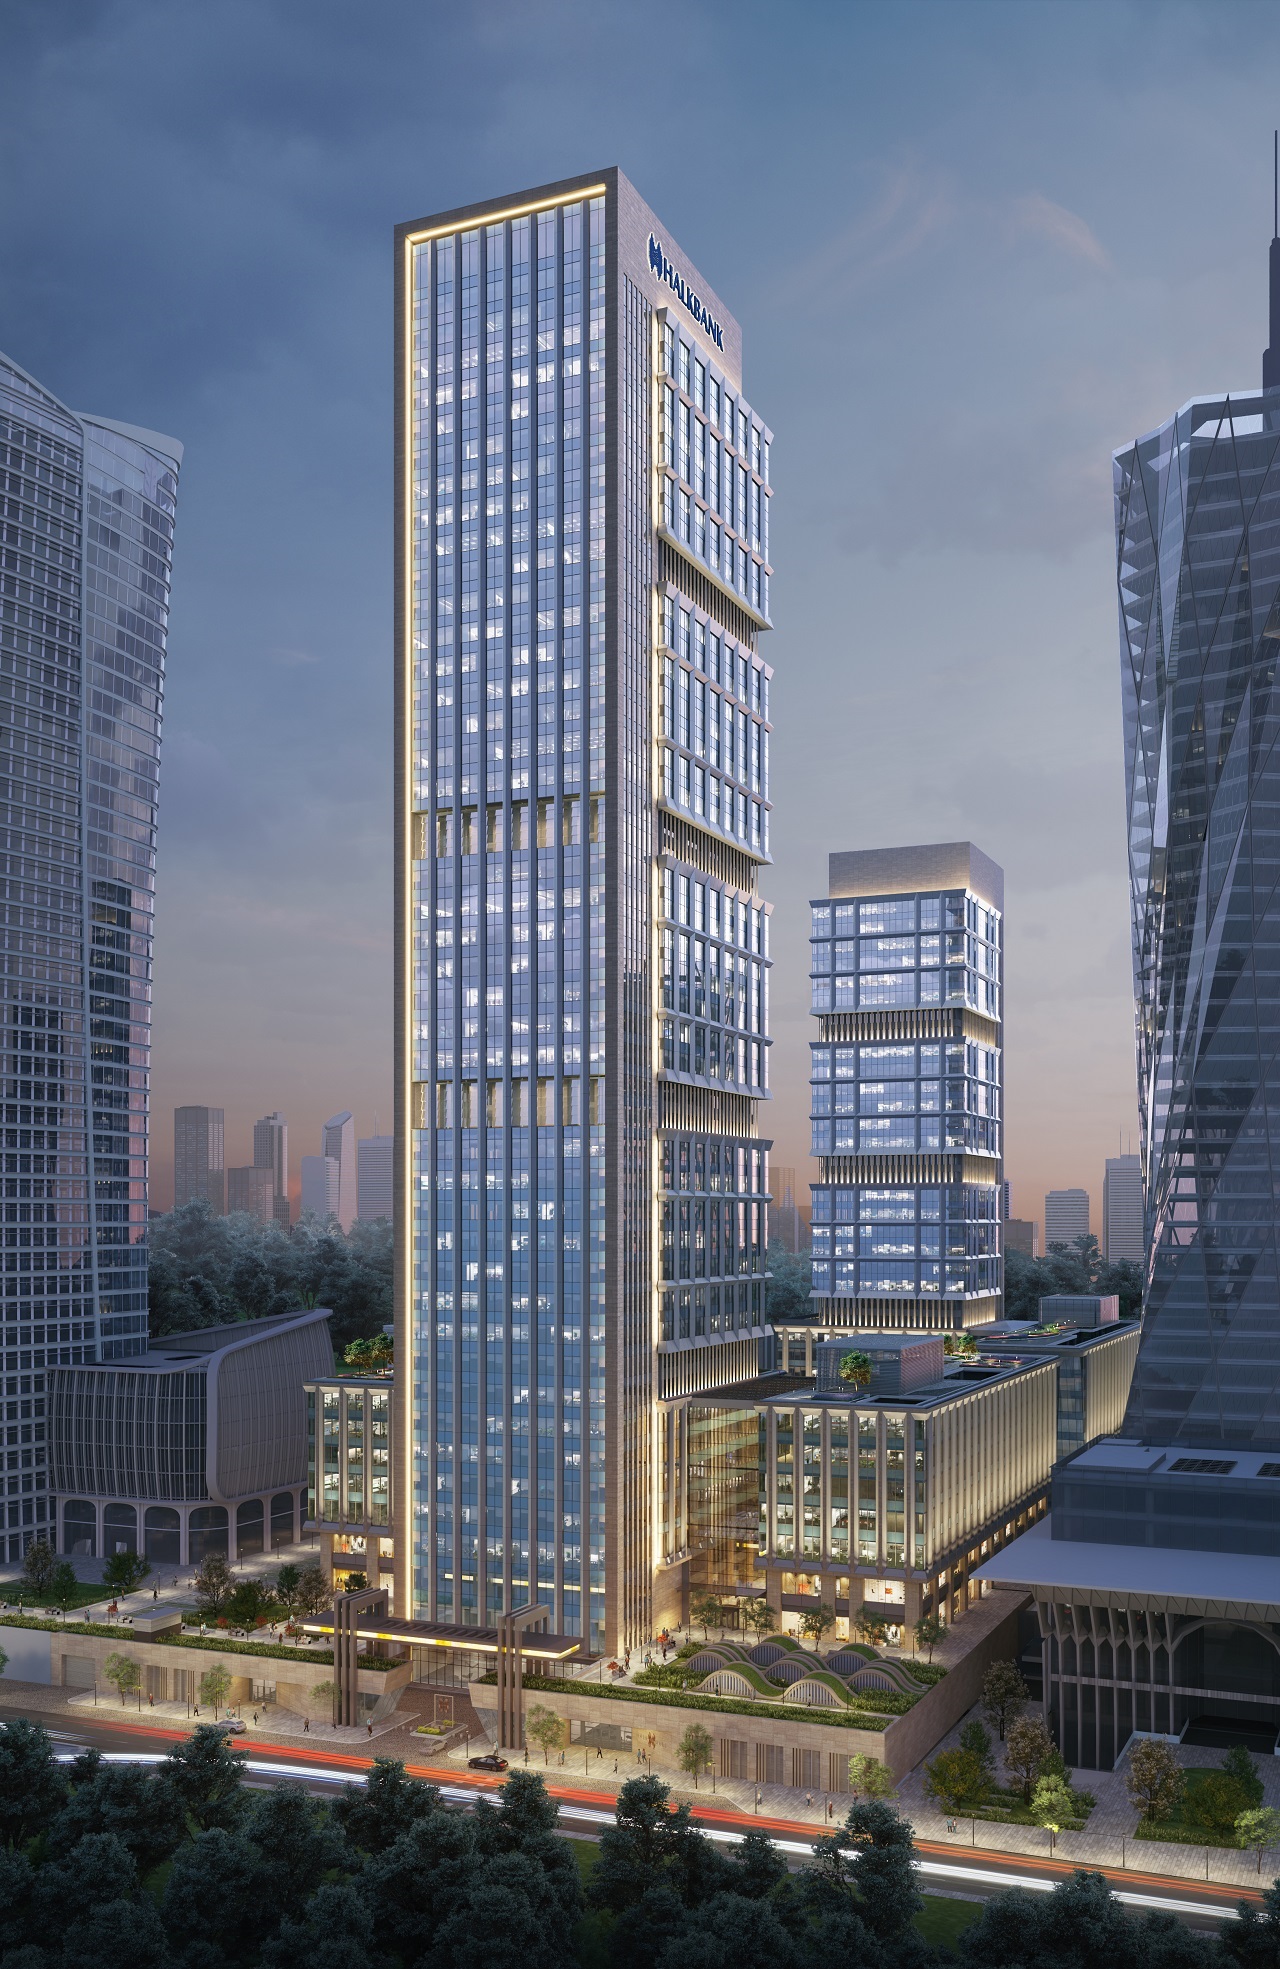 Istanbul Financial Center "Halk Towers"